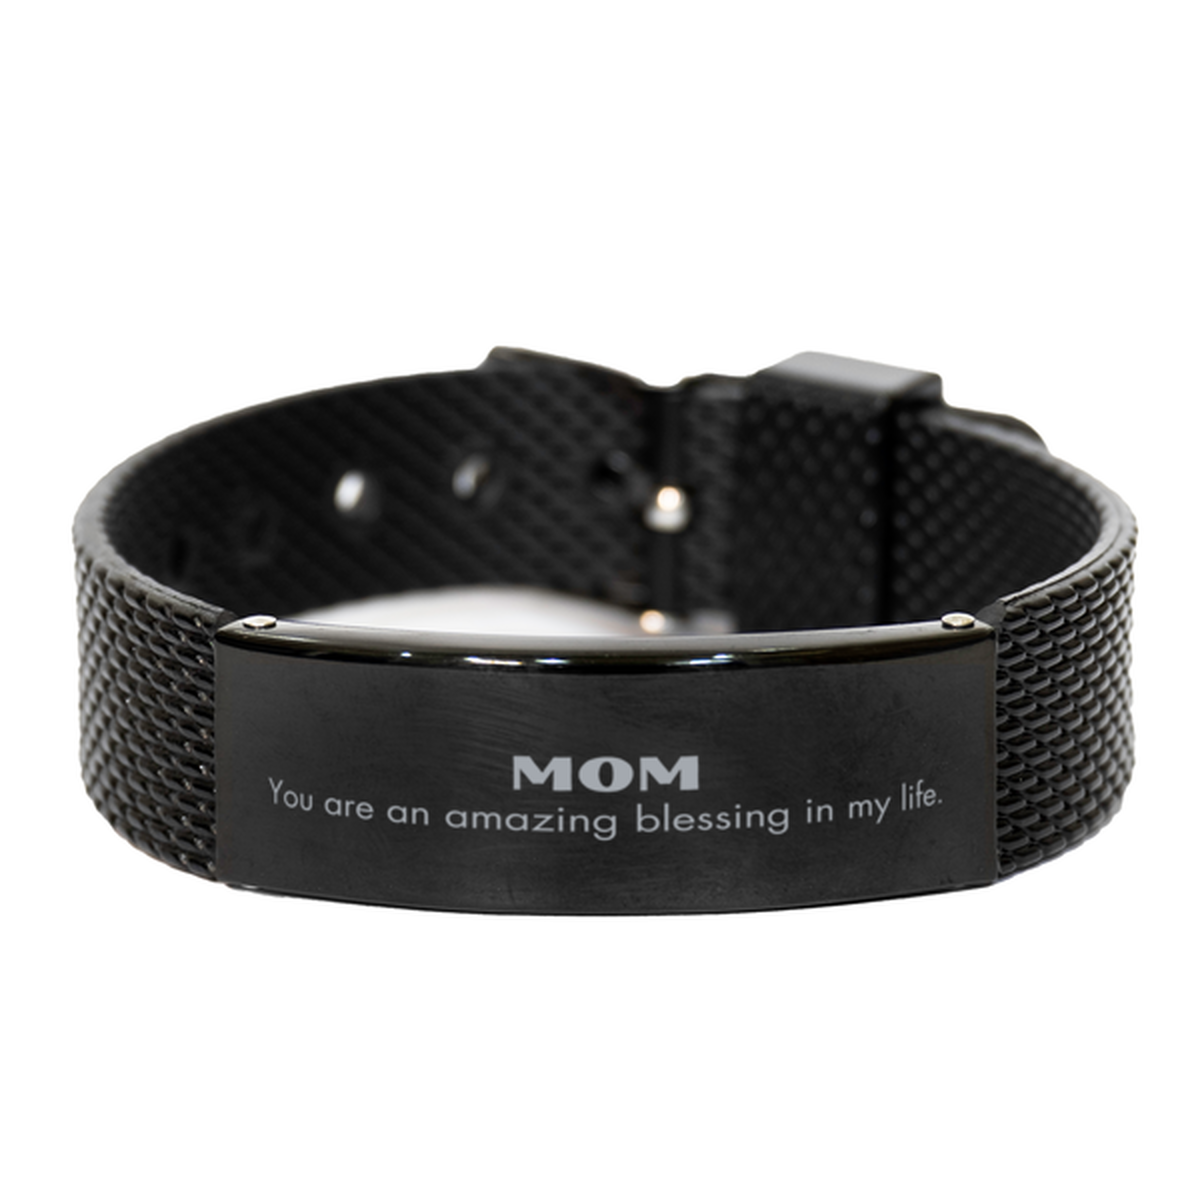 Mom Black Shark Mesh Bracelet, You are an amazing blessing in my life, Thank You Gifts For Mom, Inspirational Birthday Christmas Unique Gifts For Mom